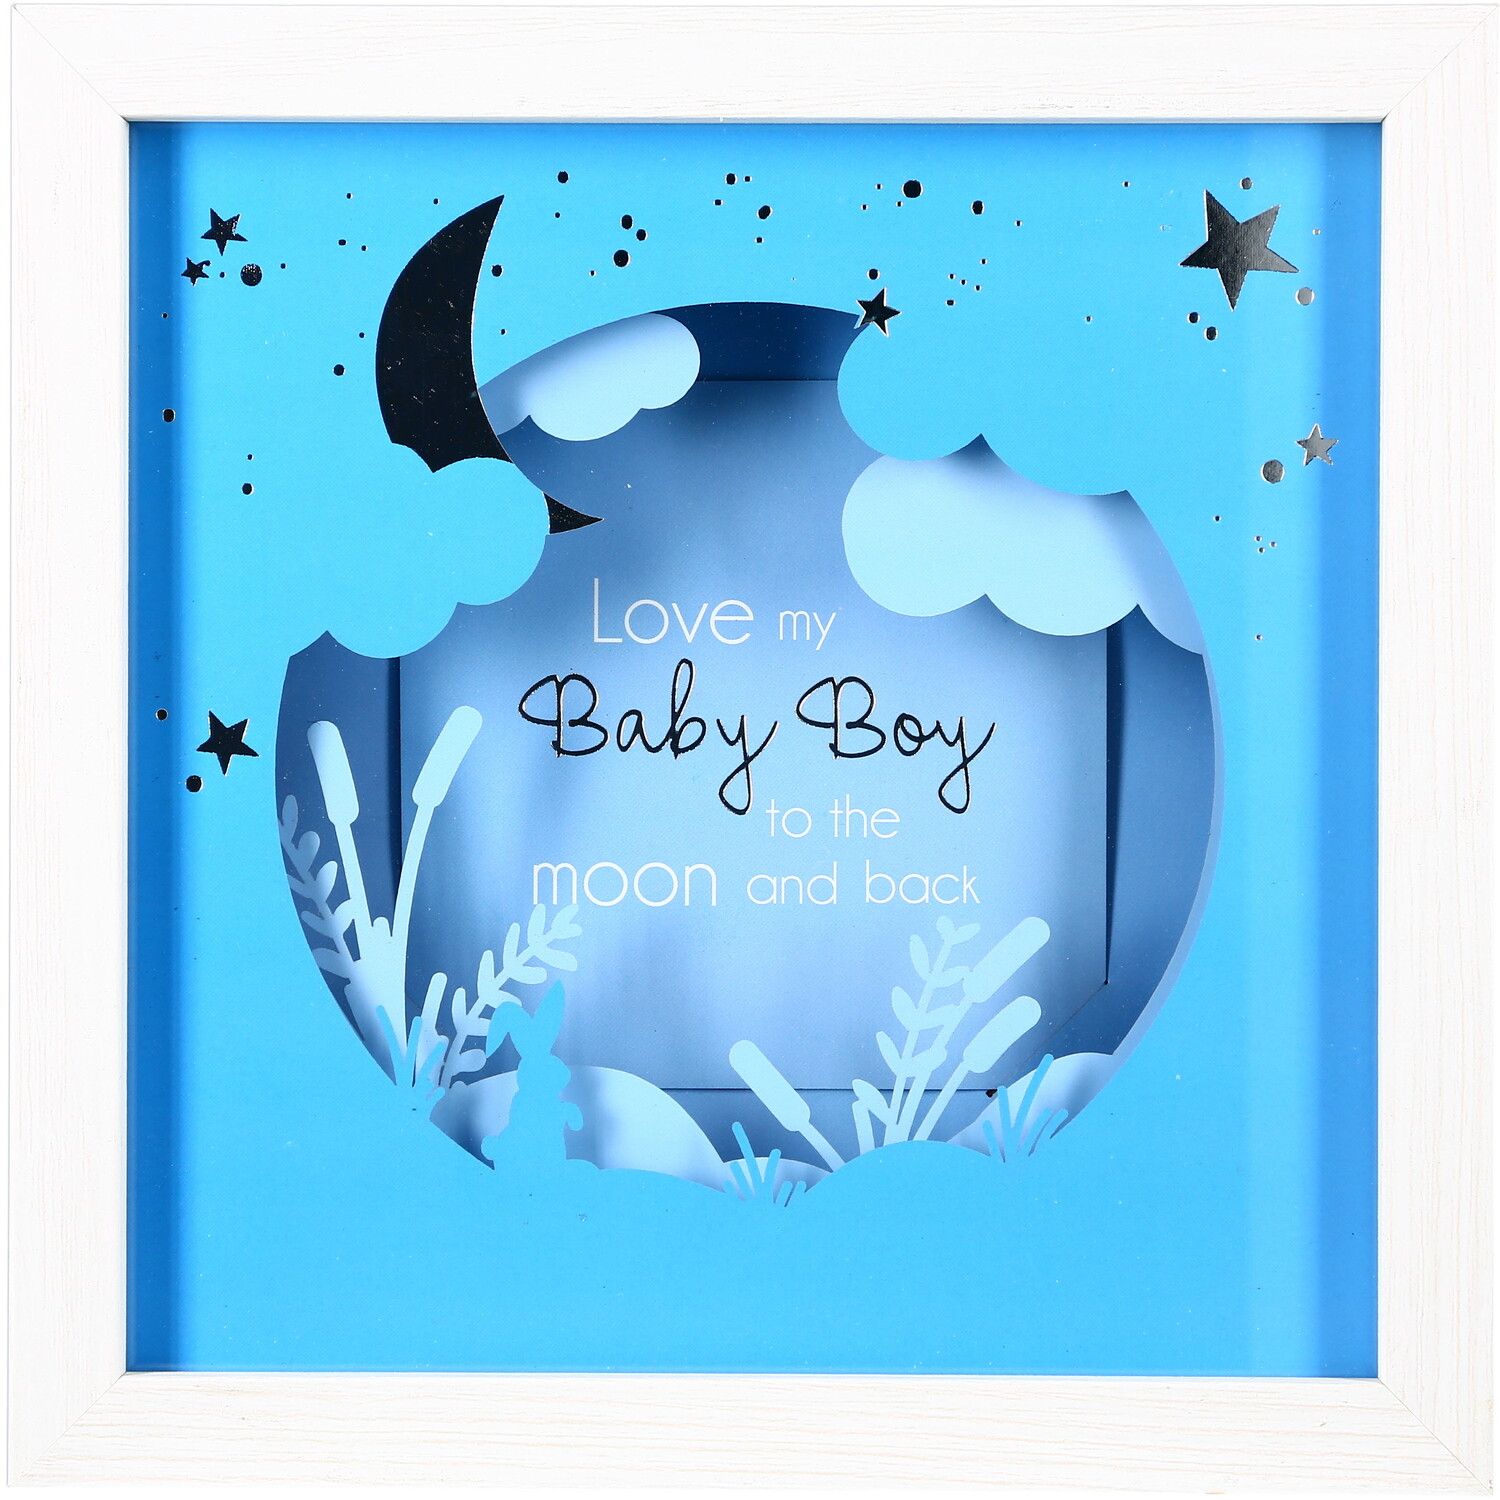 Baby Boy by Happy Occasions - Baby Boy - 7.75" Shadow Box Frame (Holds 4" x 4" Photo)